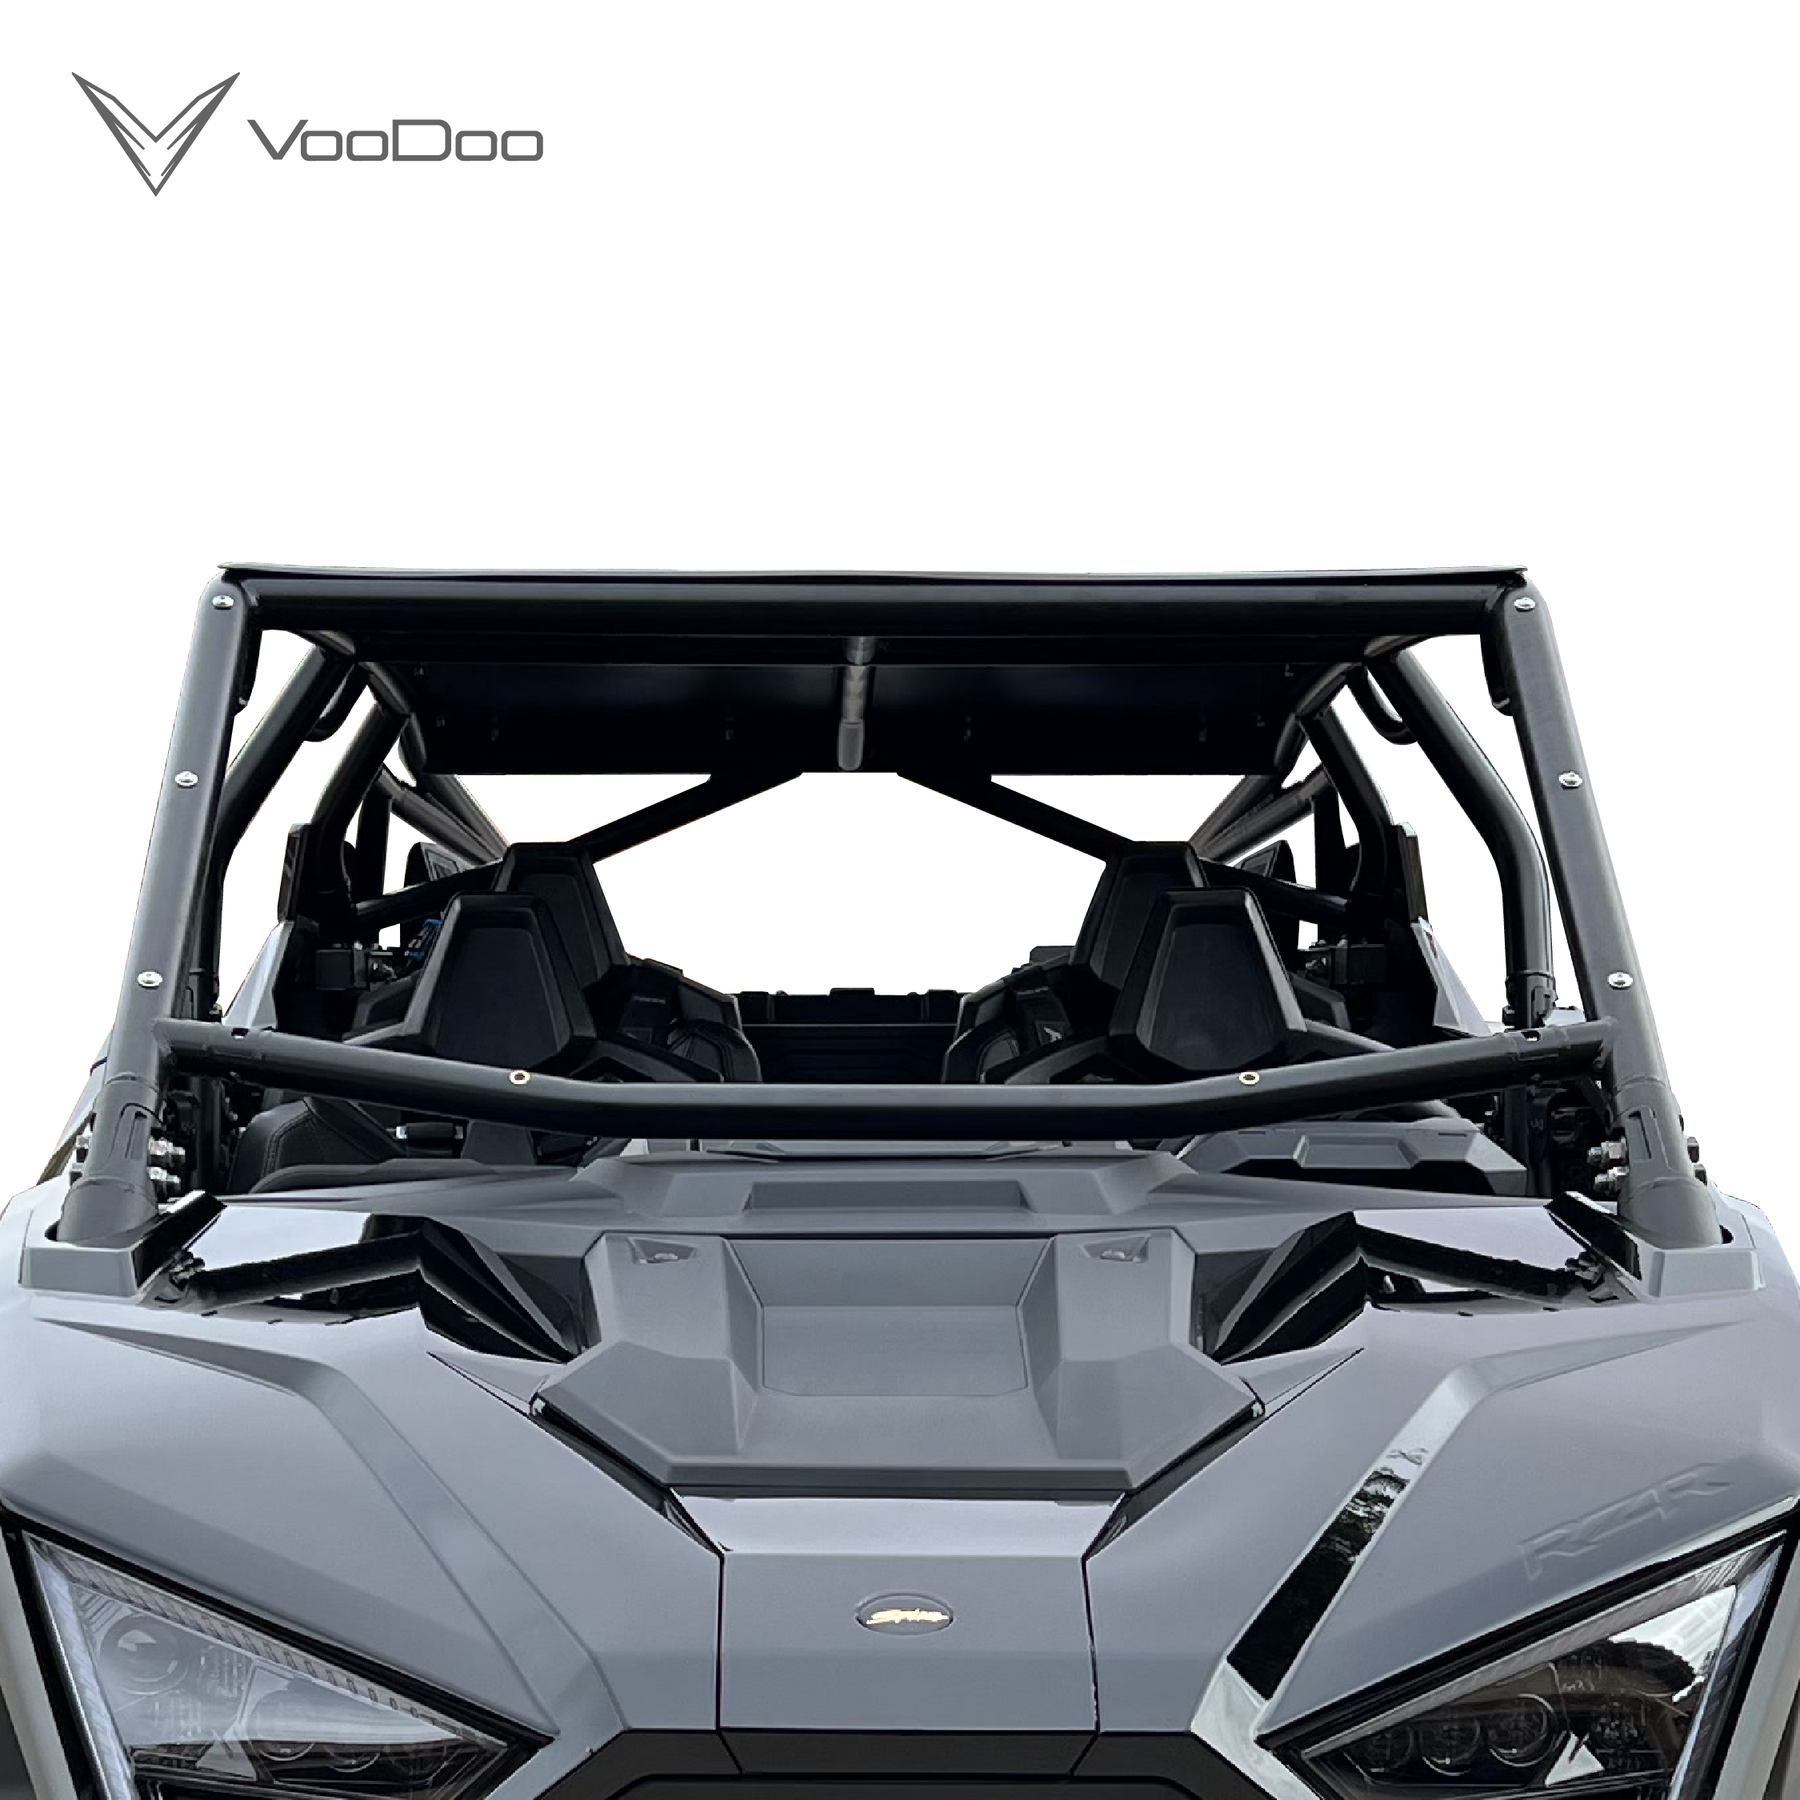 VooDoo RZR Pro Turbo R Off Camber Roll Cage